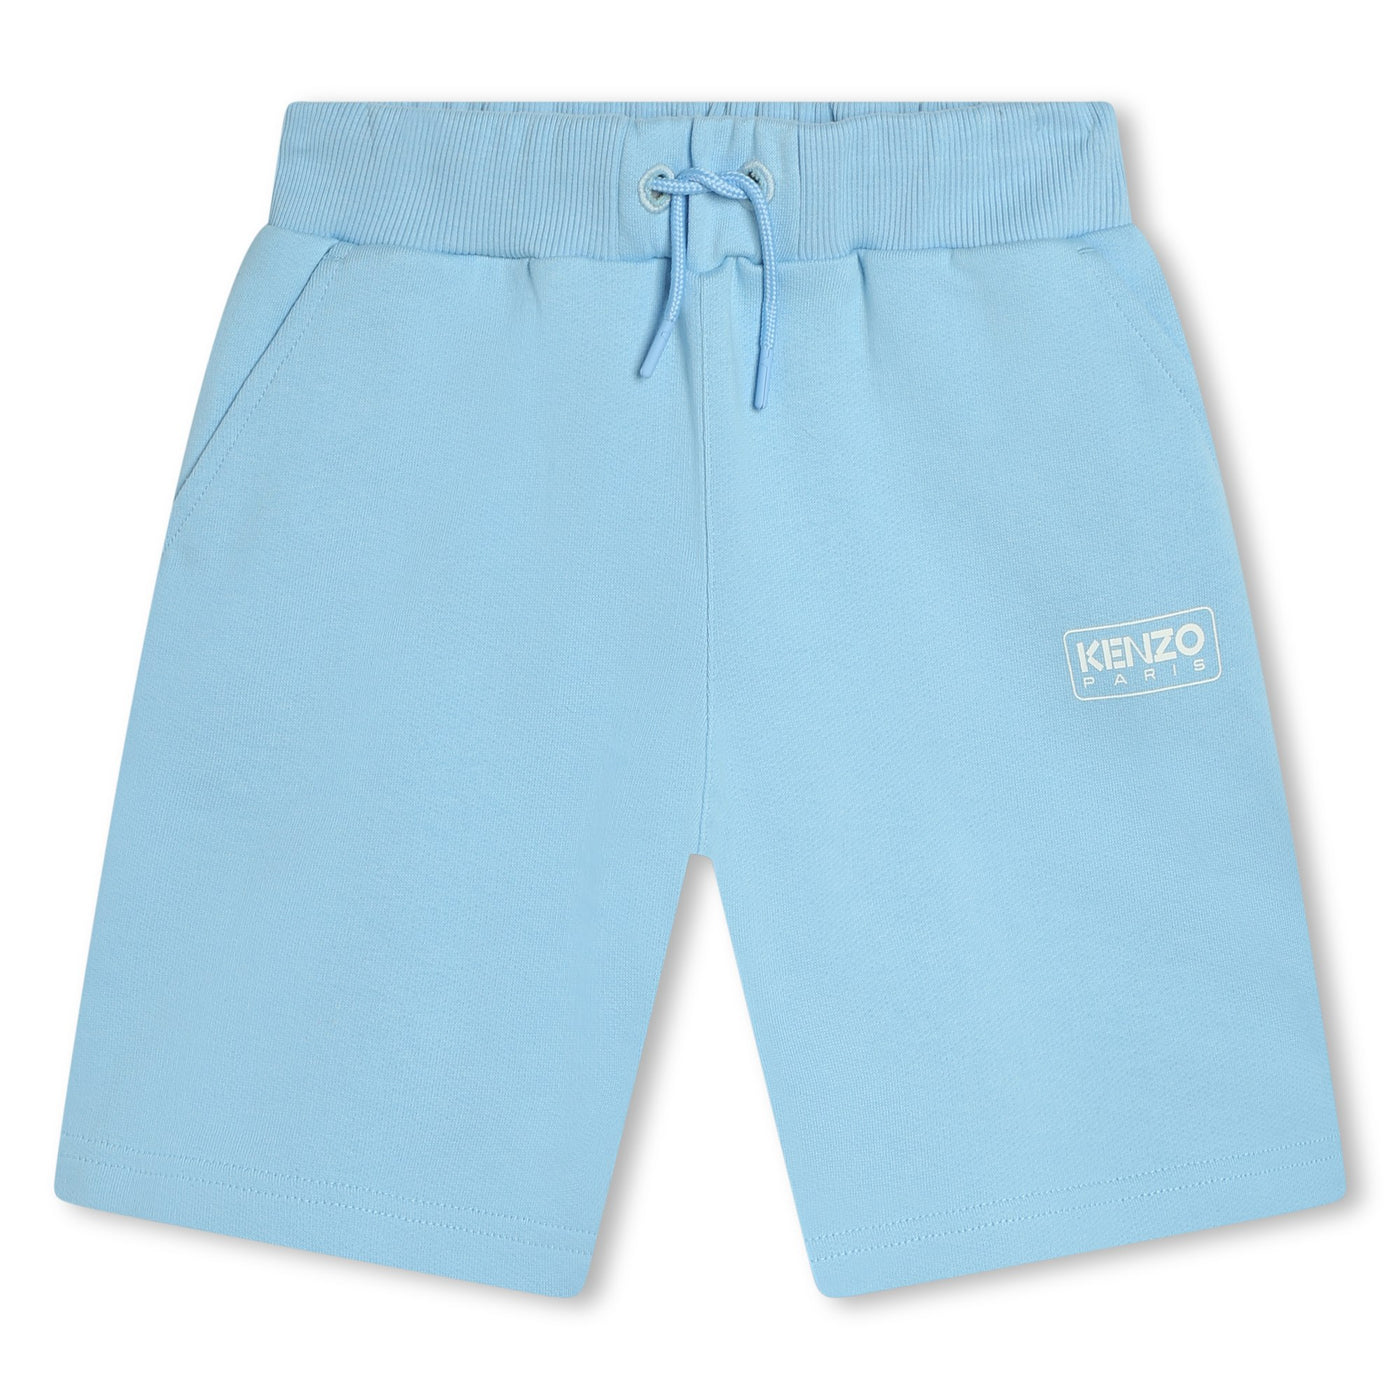 Pale Blue Shorts by Kenzo